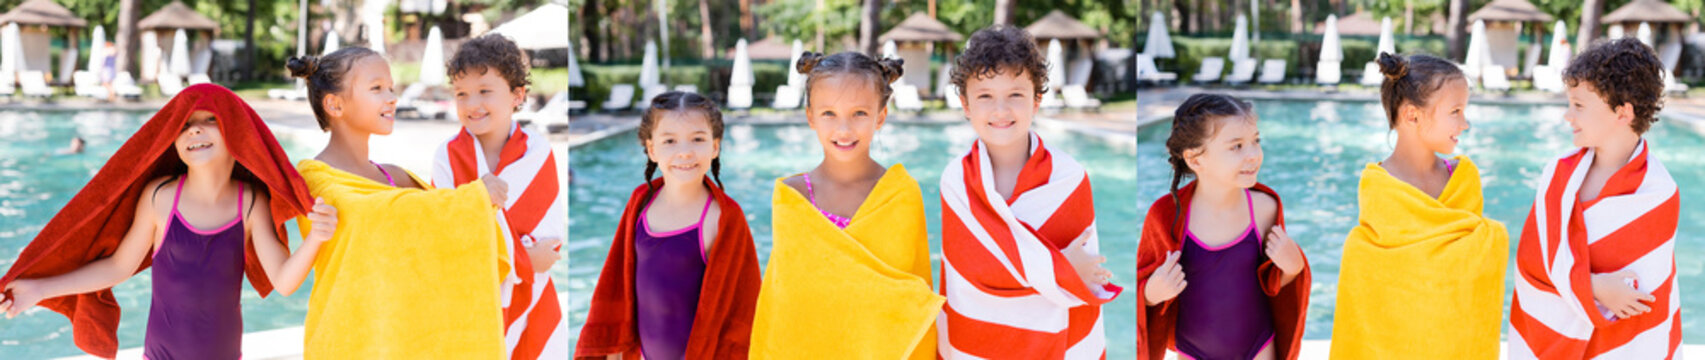 collage of friends wrapping in colorful terry towels near swimming pool, panoramic shot